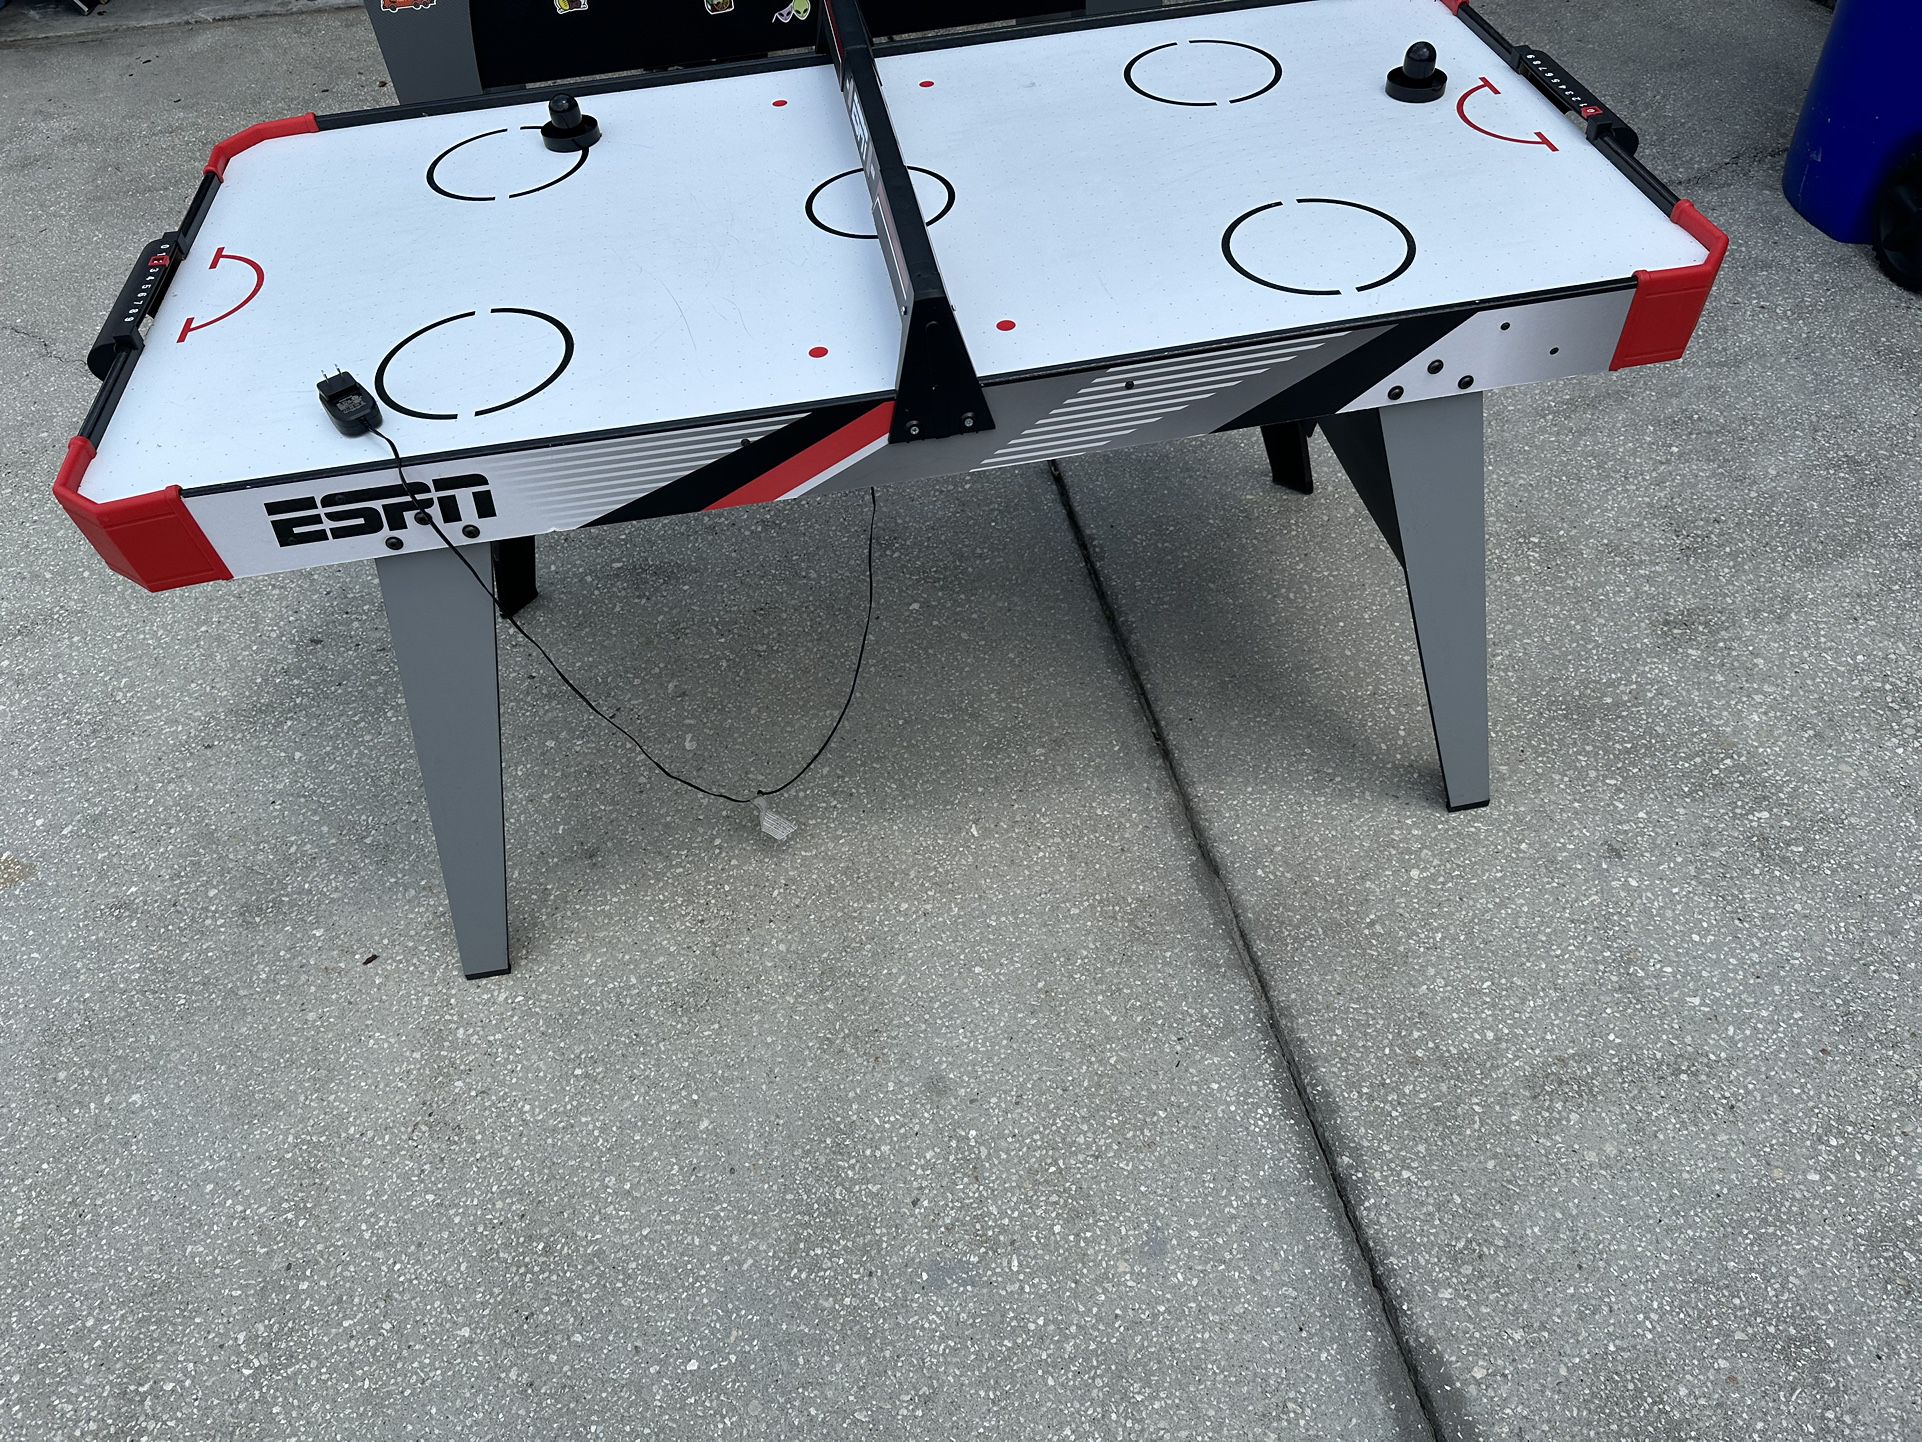 High-Quality Air Hockey Table for Sale - Missing Hockey Puck, Great Condition!